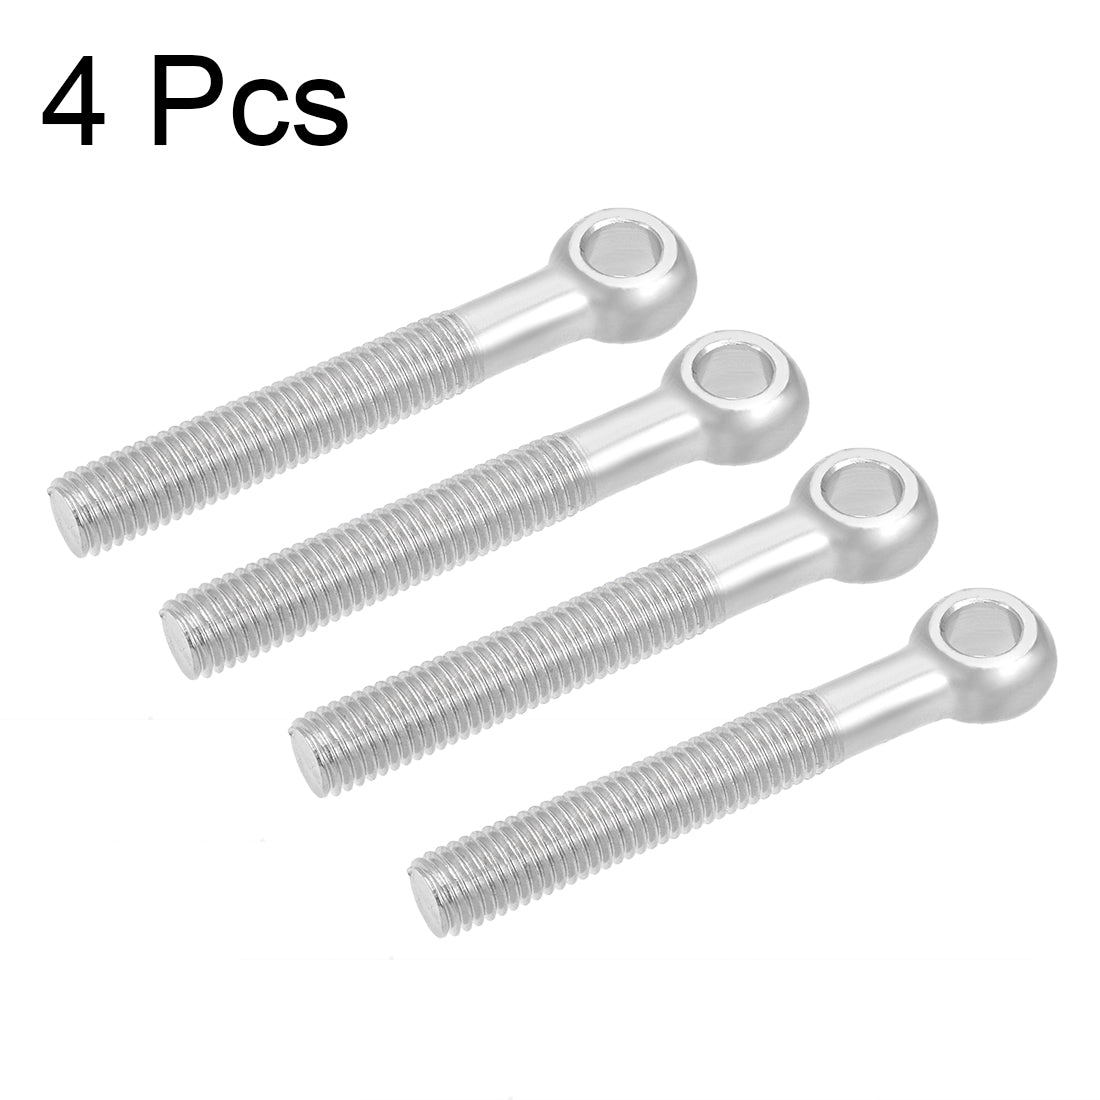 Uxcell Uxcell M5 x 45mm 304 Stainless Steel Machine Shoulder Lift Eye Bolt Rigging 4pcs